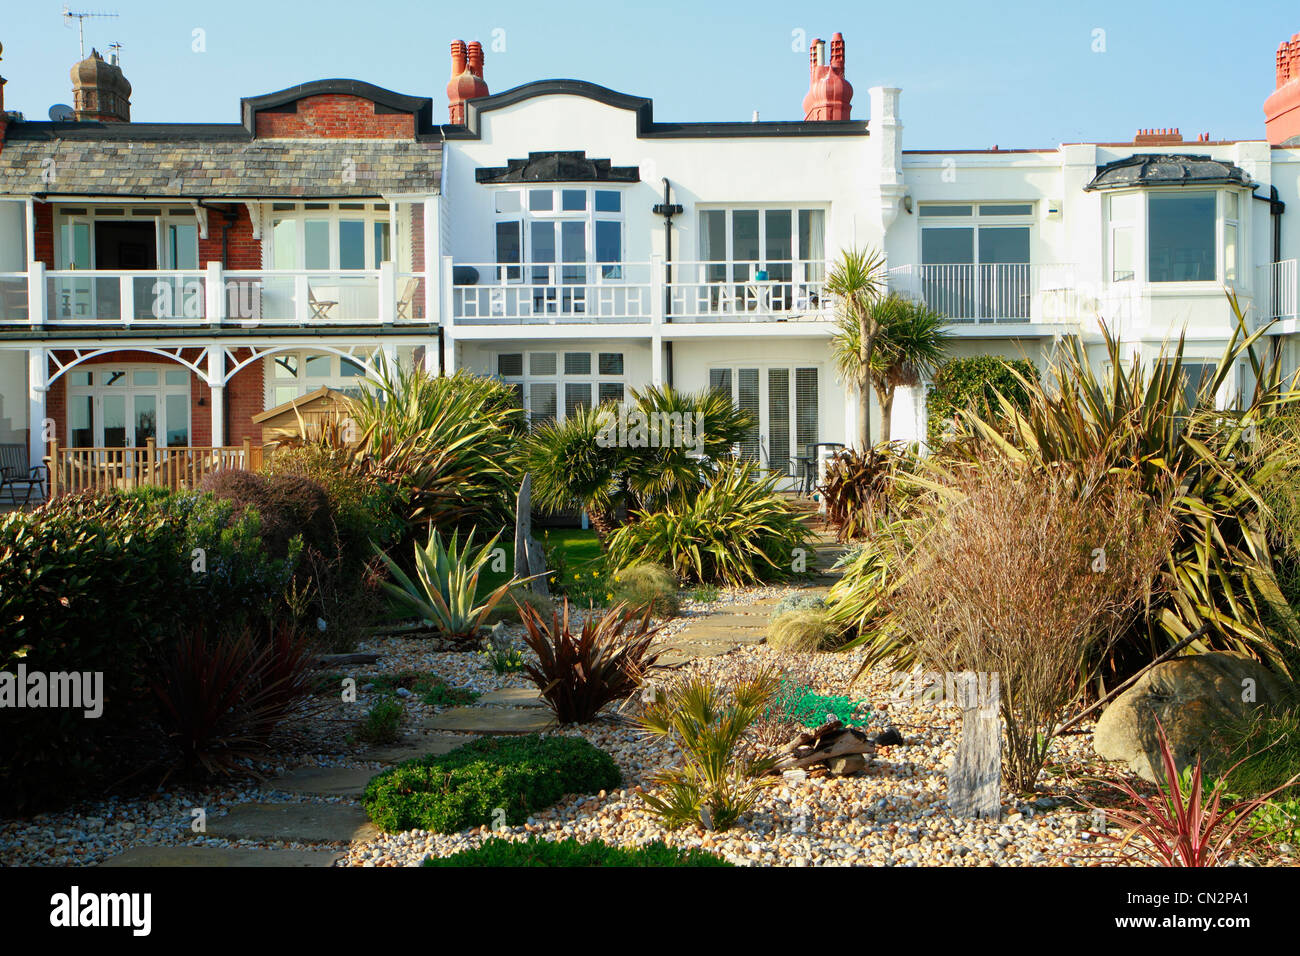 Seafront house and garden, Bexhill-on-sea, East Sussex, UK Stock Photo